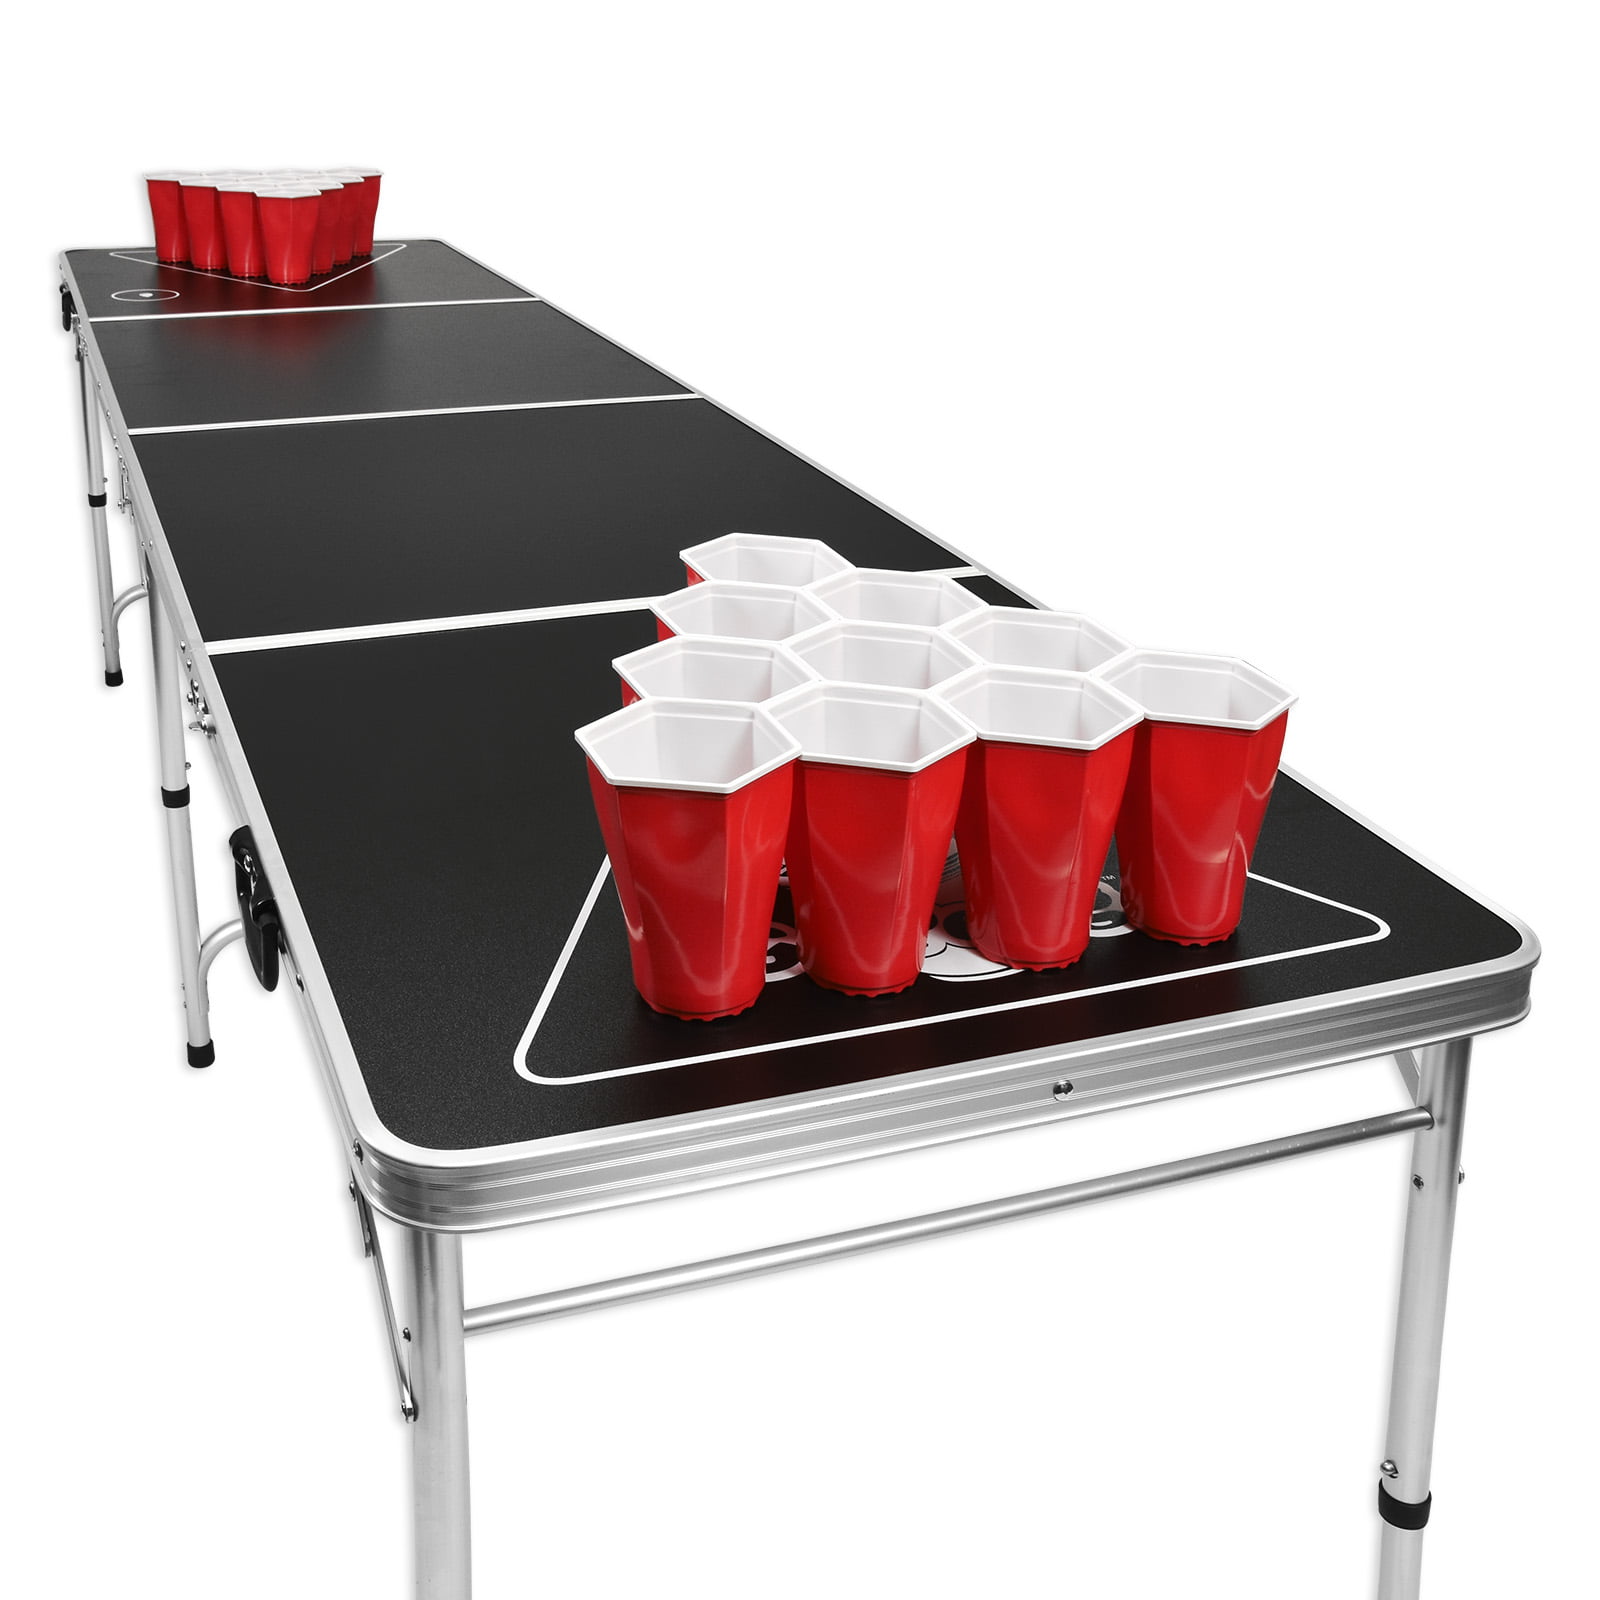 8-Foot Flip Cup Beer Pong Table Set With Holes Tailgate Pool Game Portable Erase 